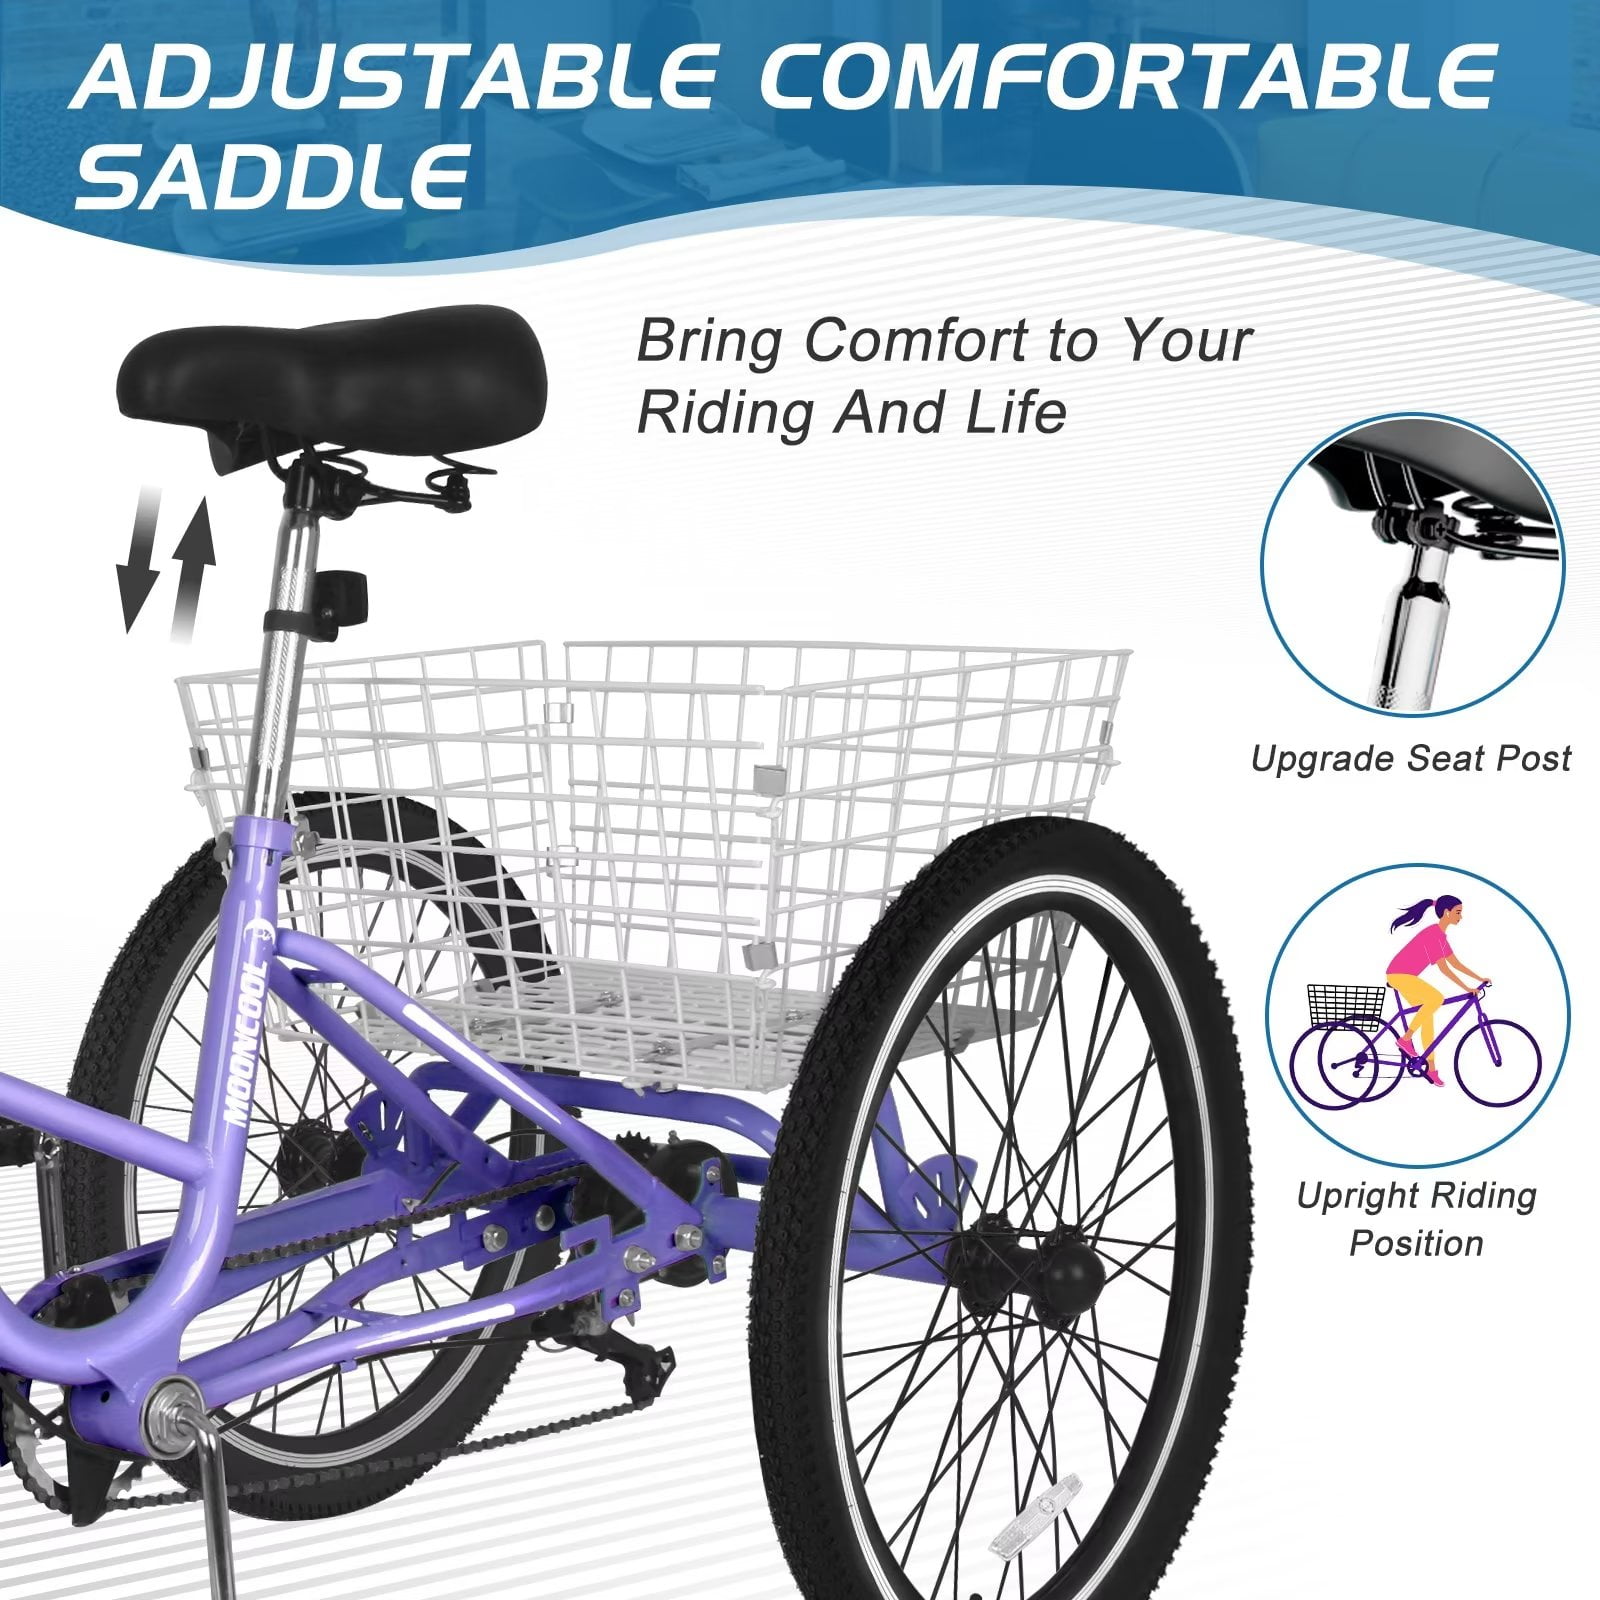 MOPHOTO 20/24/26 inch Wheels 7 Speed Adult Tricycle Adult Seat Adjustable with Low-Step Through Frame, Cruiser Trike for Women Men Support 350 bls with Big Basket for Shopping, Exercise